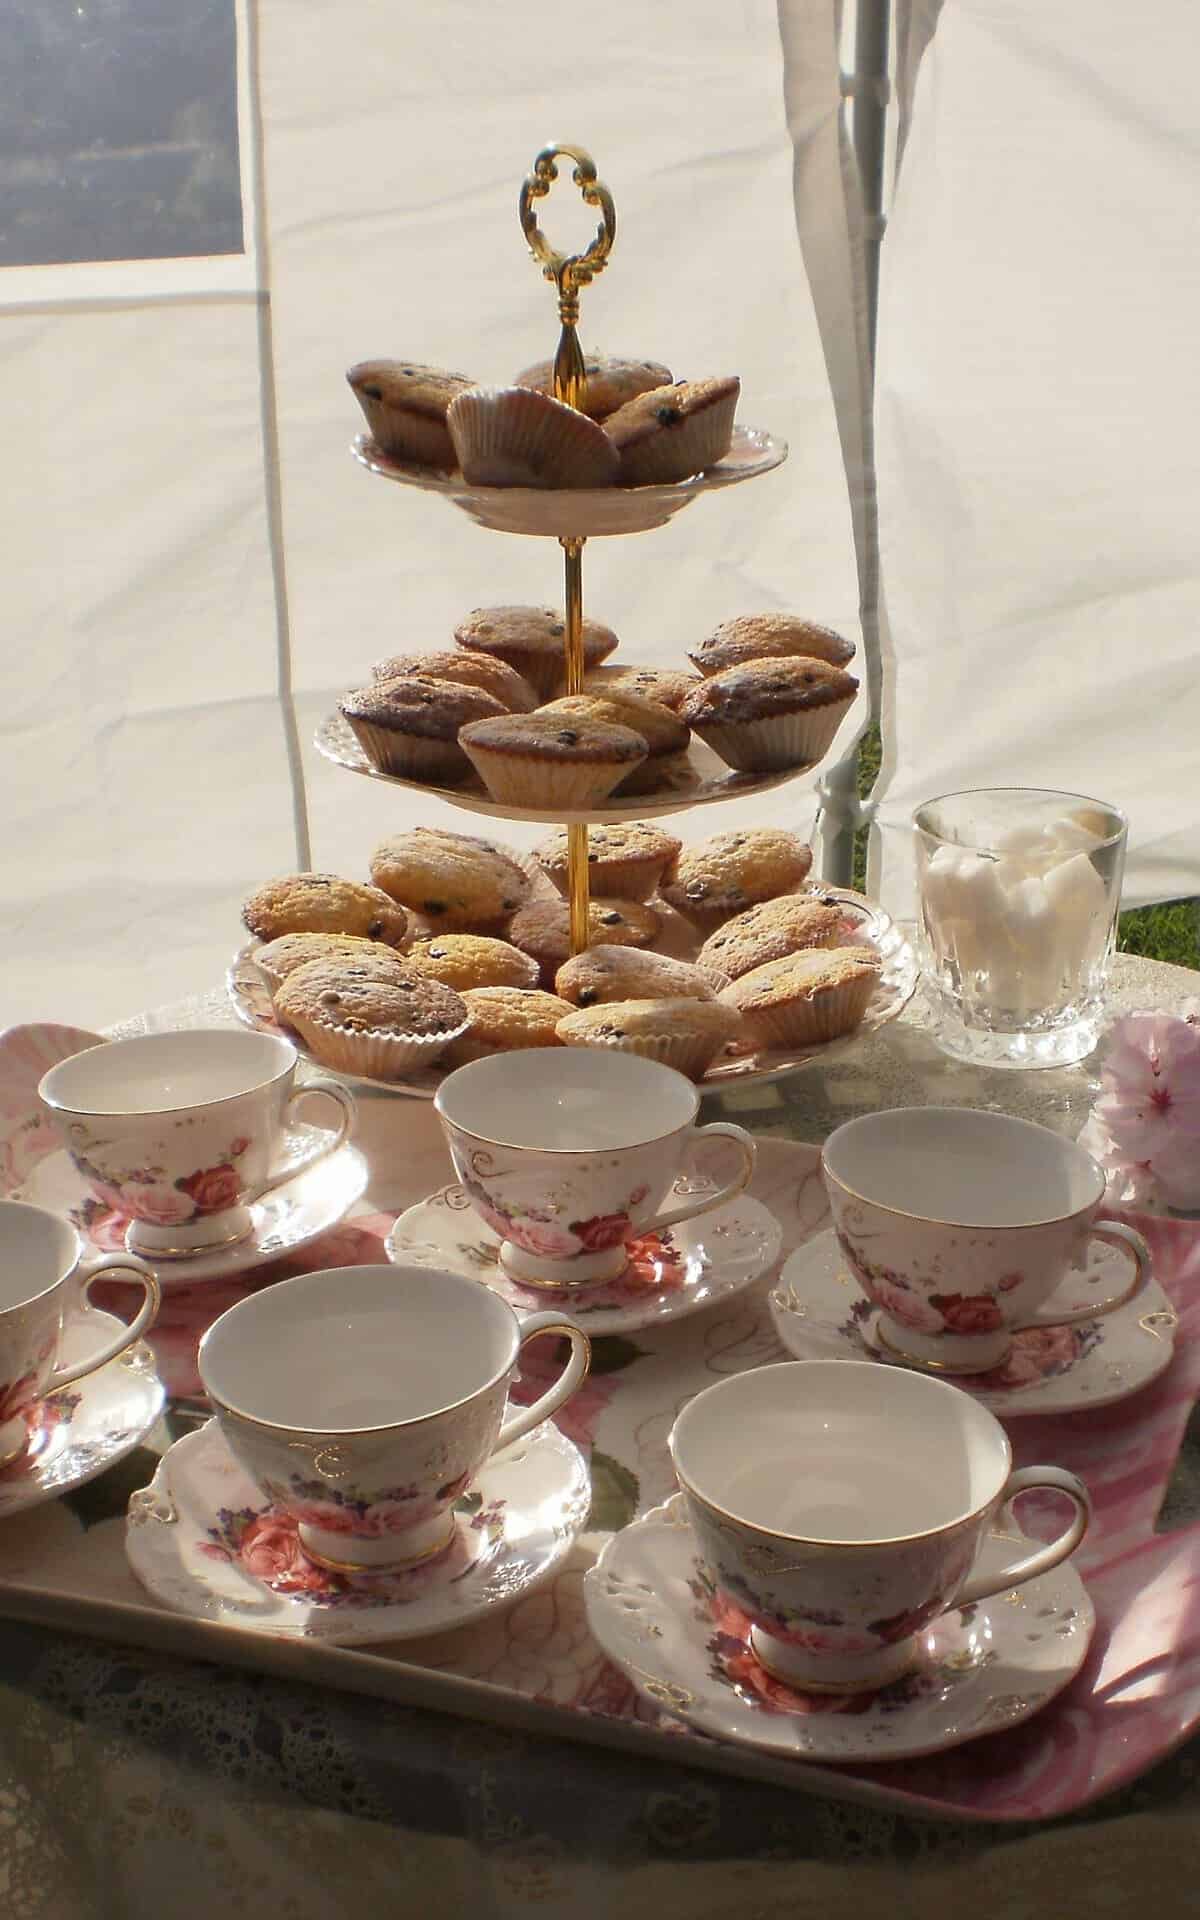  Bite into the perfect tea time treat with these Regency Queen Cakes.